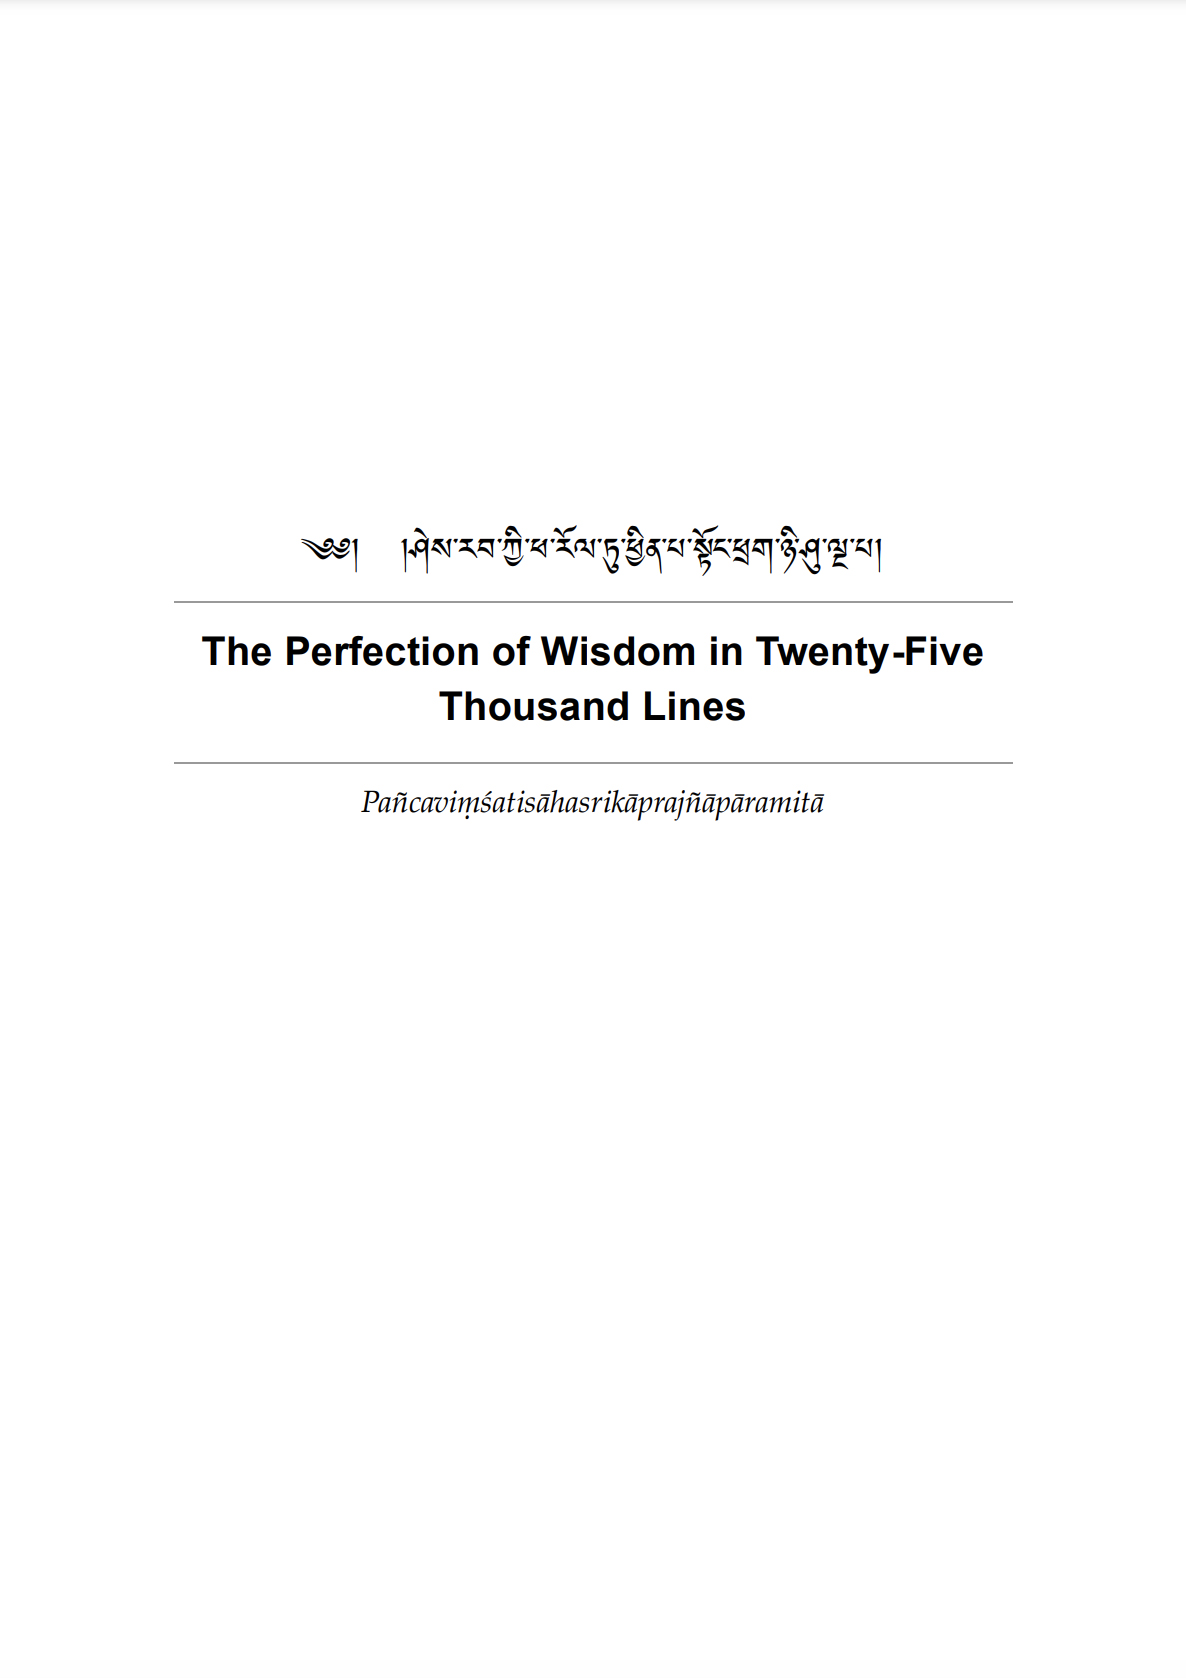 The Perfection of Wisdom in Twenty-Five Thousand Lines 84000-front.jpg